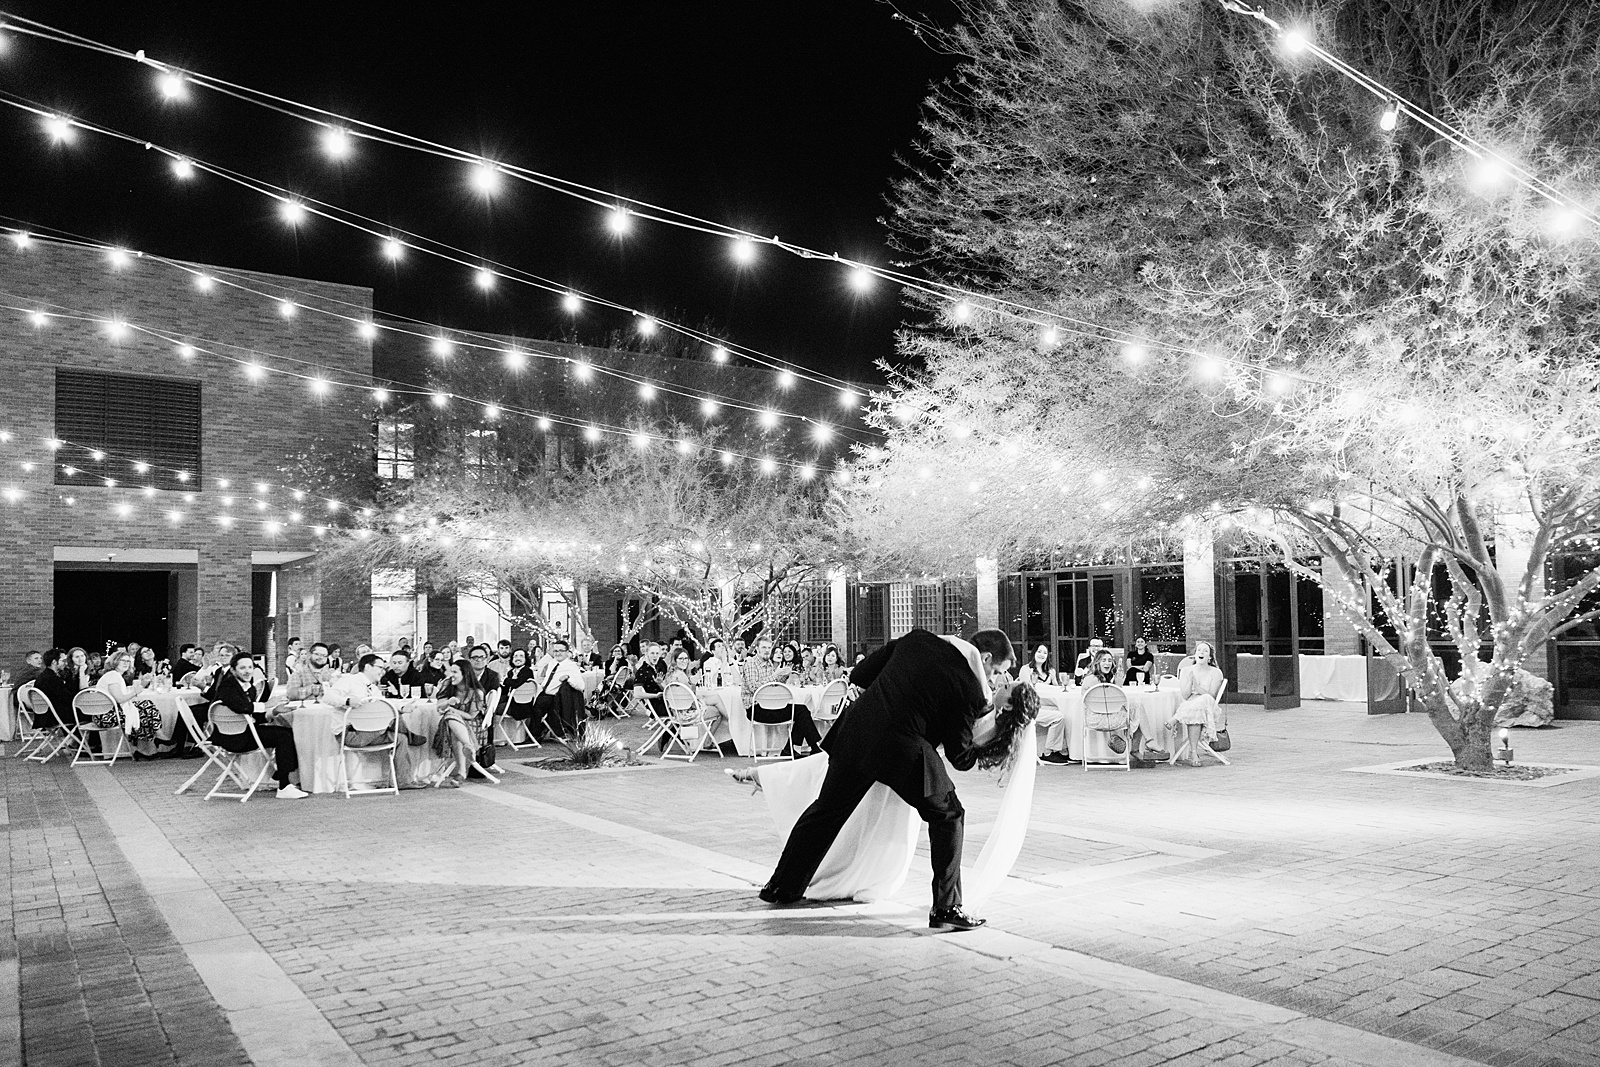 Bride and groom sharing first dance at their Arizona Historical Society wedding reception by Arizona wedding photographer PMA Photography.